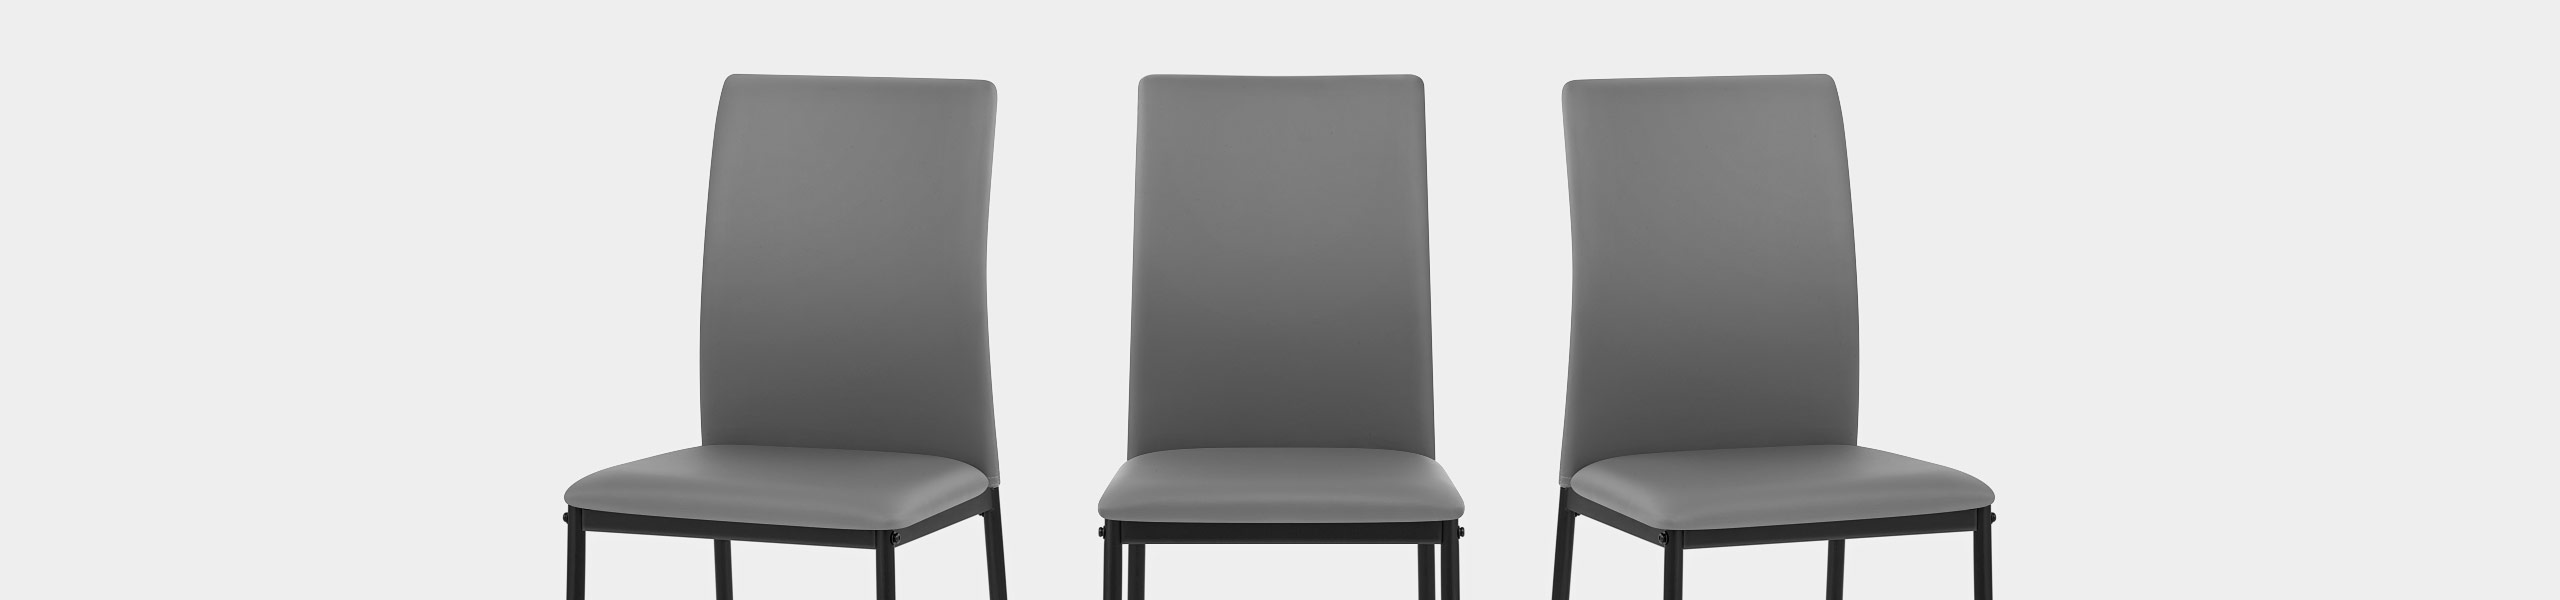 Franky Dining Chair Grey Video Banner